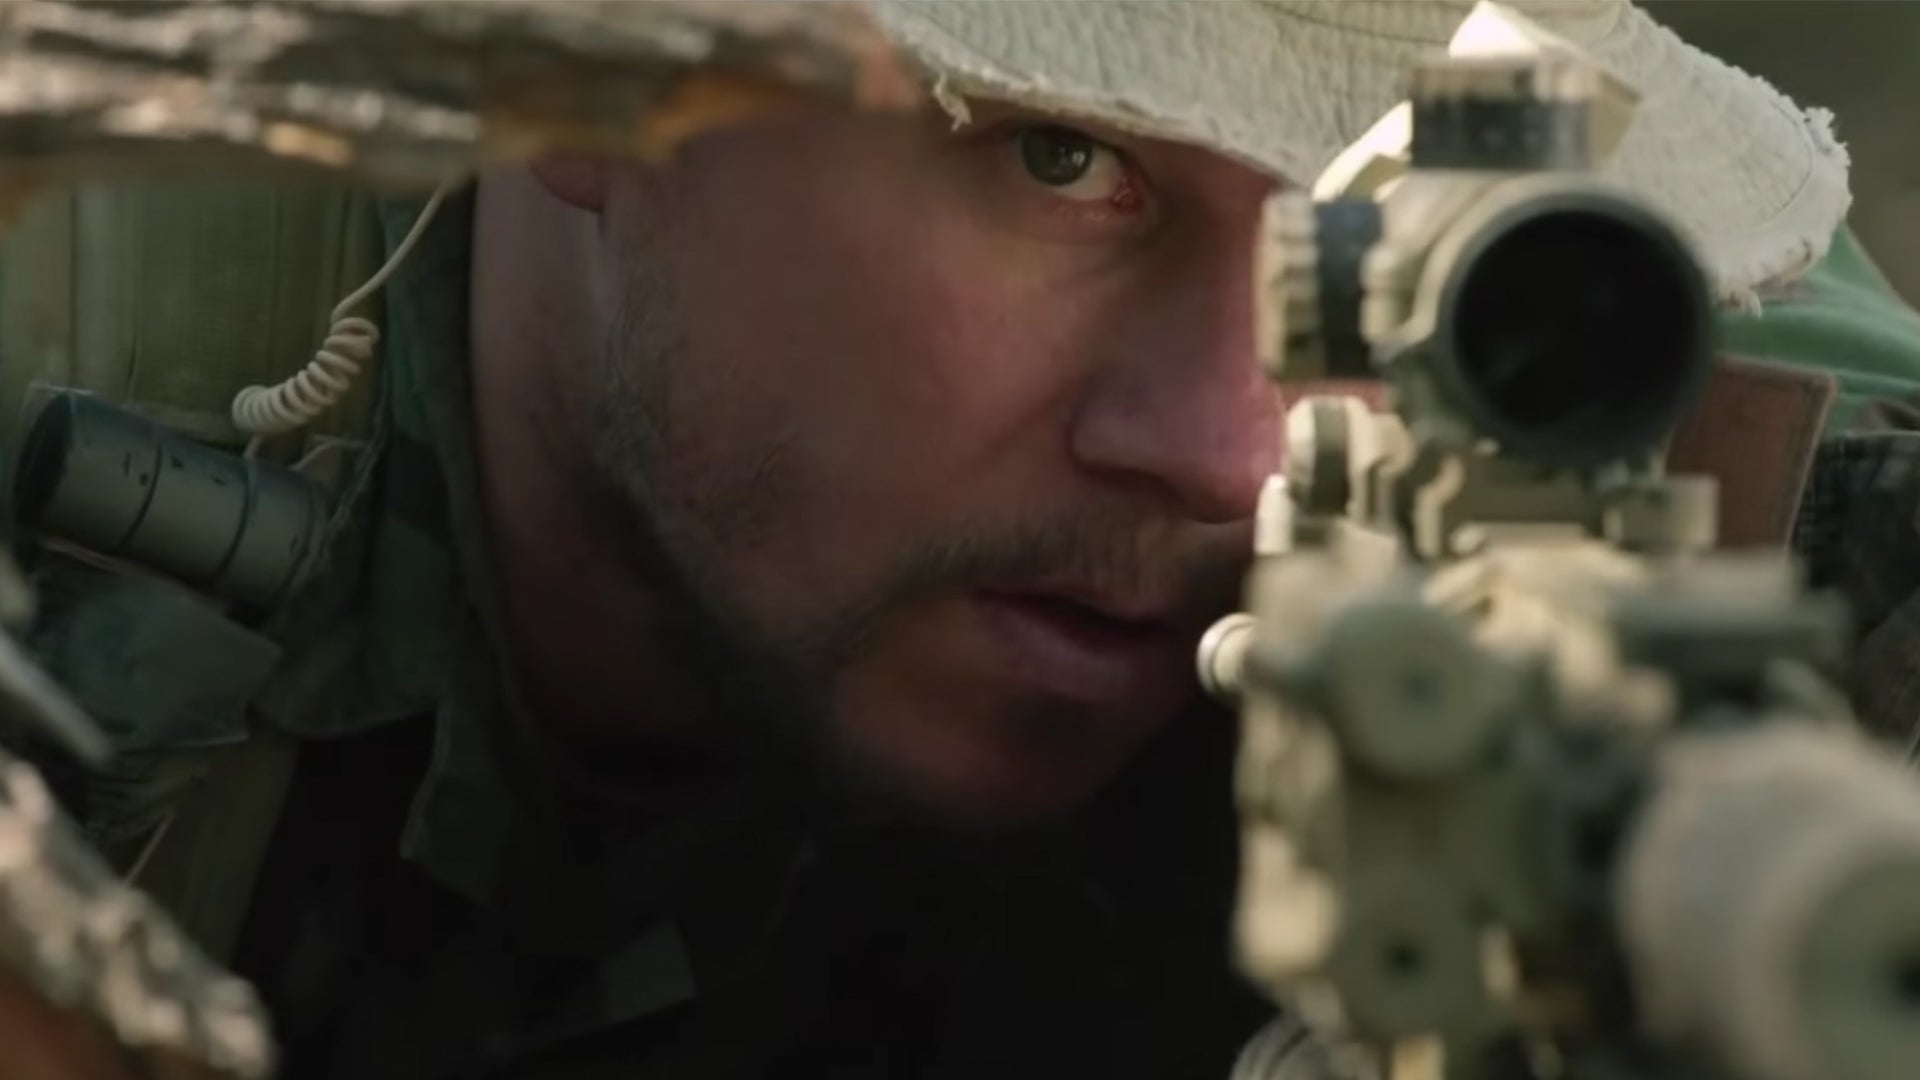 Review: 'Lone Survivor' is Intense, Powerful, Fast-Paced War Drama